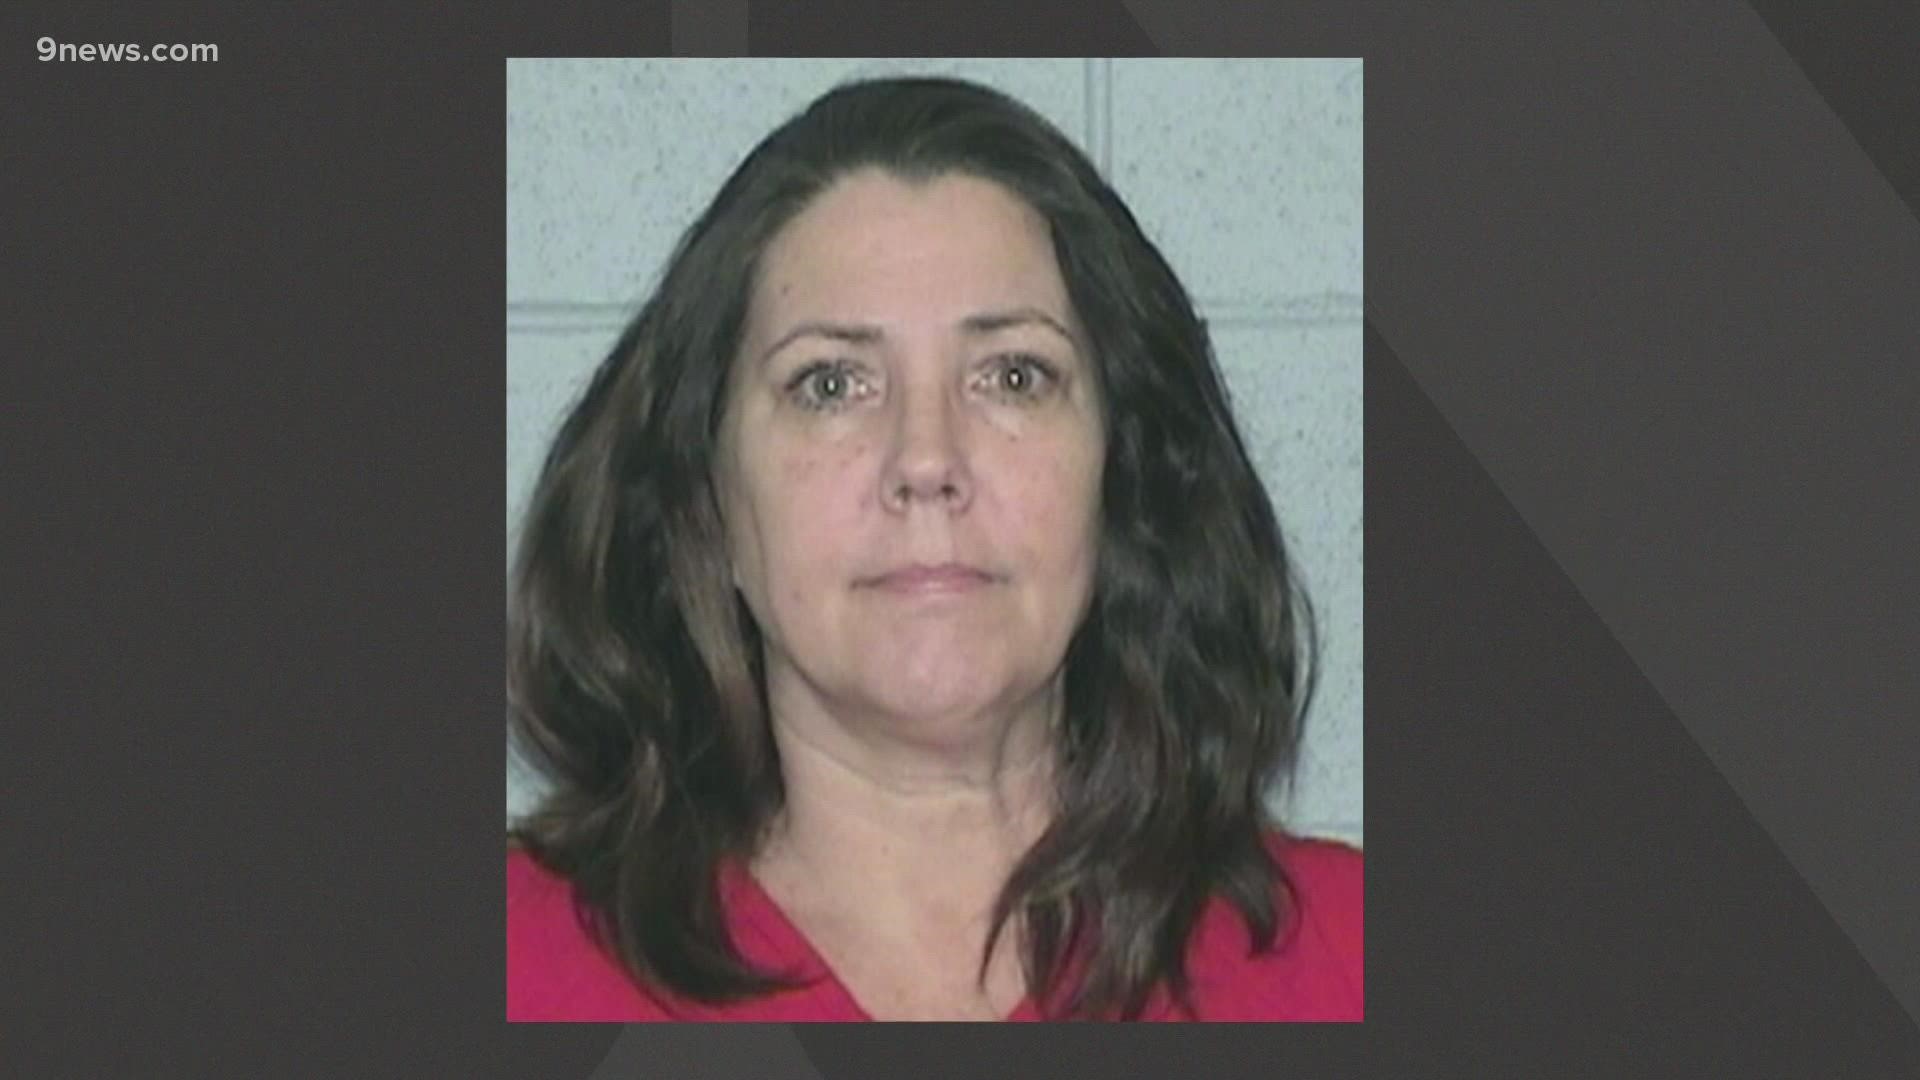 Cynthia Abcug of Parker is charged with plotting the kidnapping of her son from foster care.